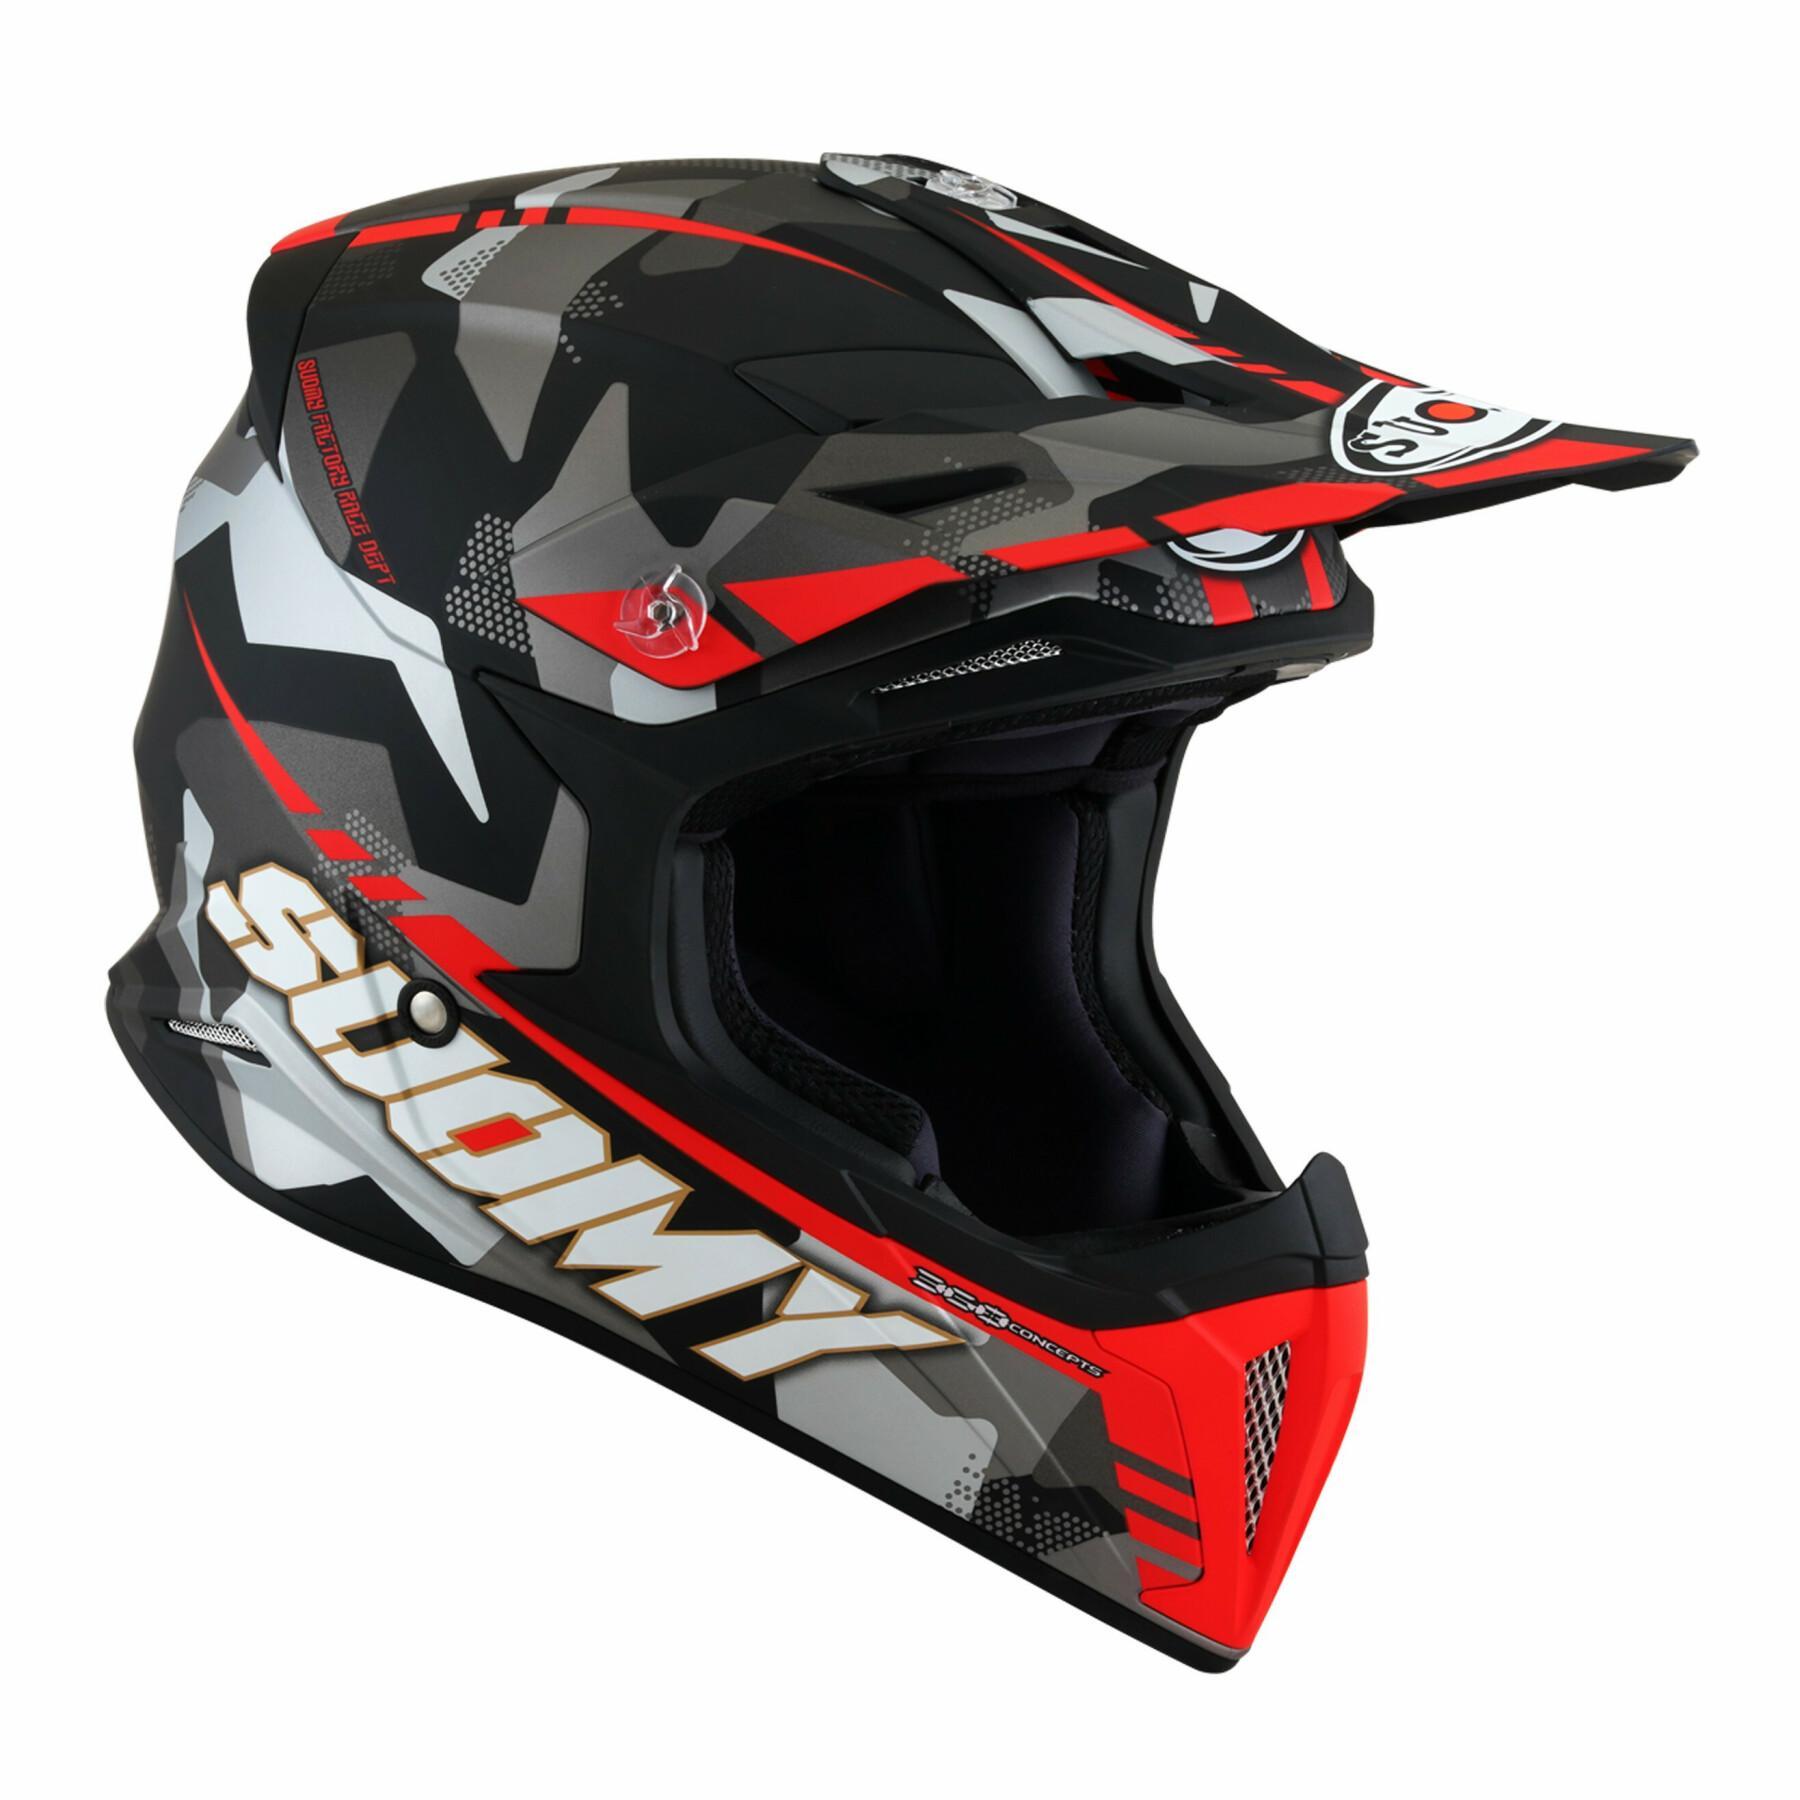 Kask krzyżowy Suomy x-wing camouflager